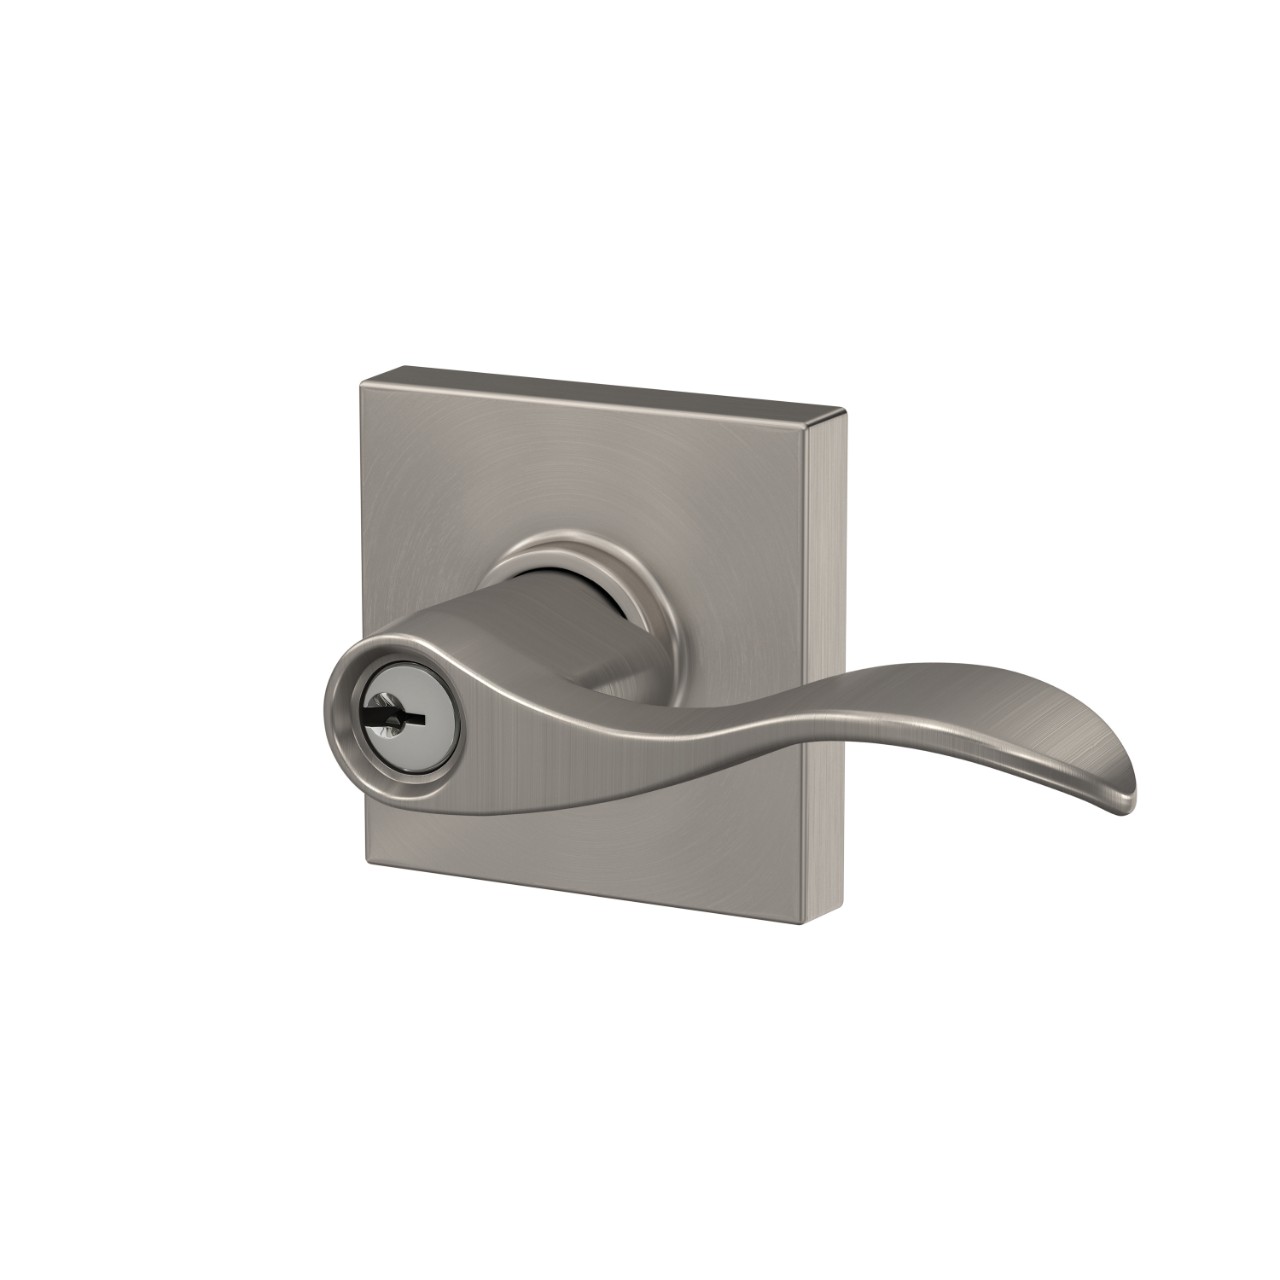 Accent lever Keyed Entry lock